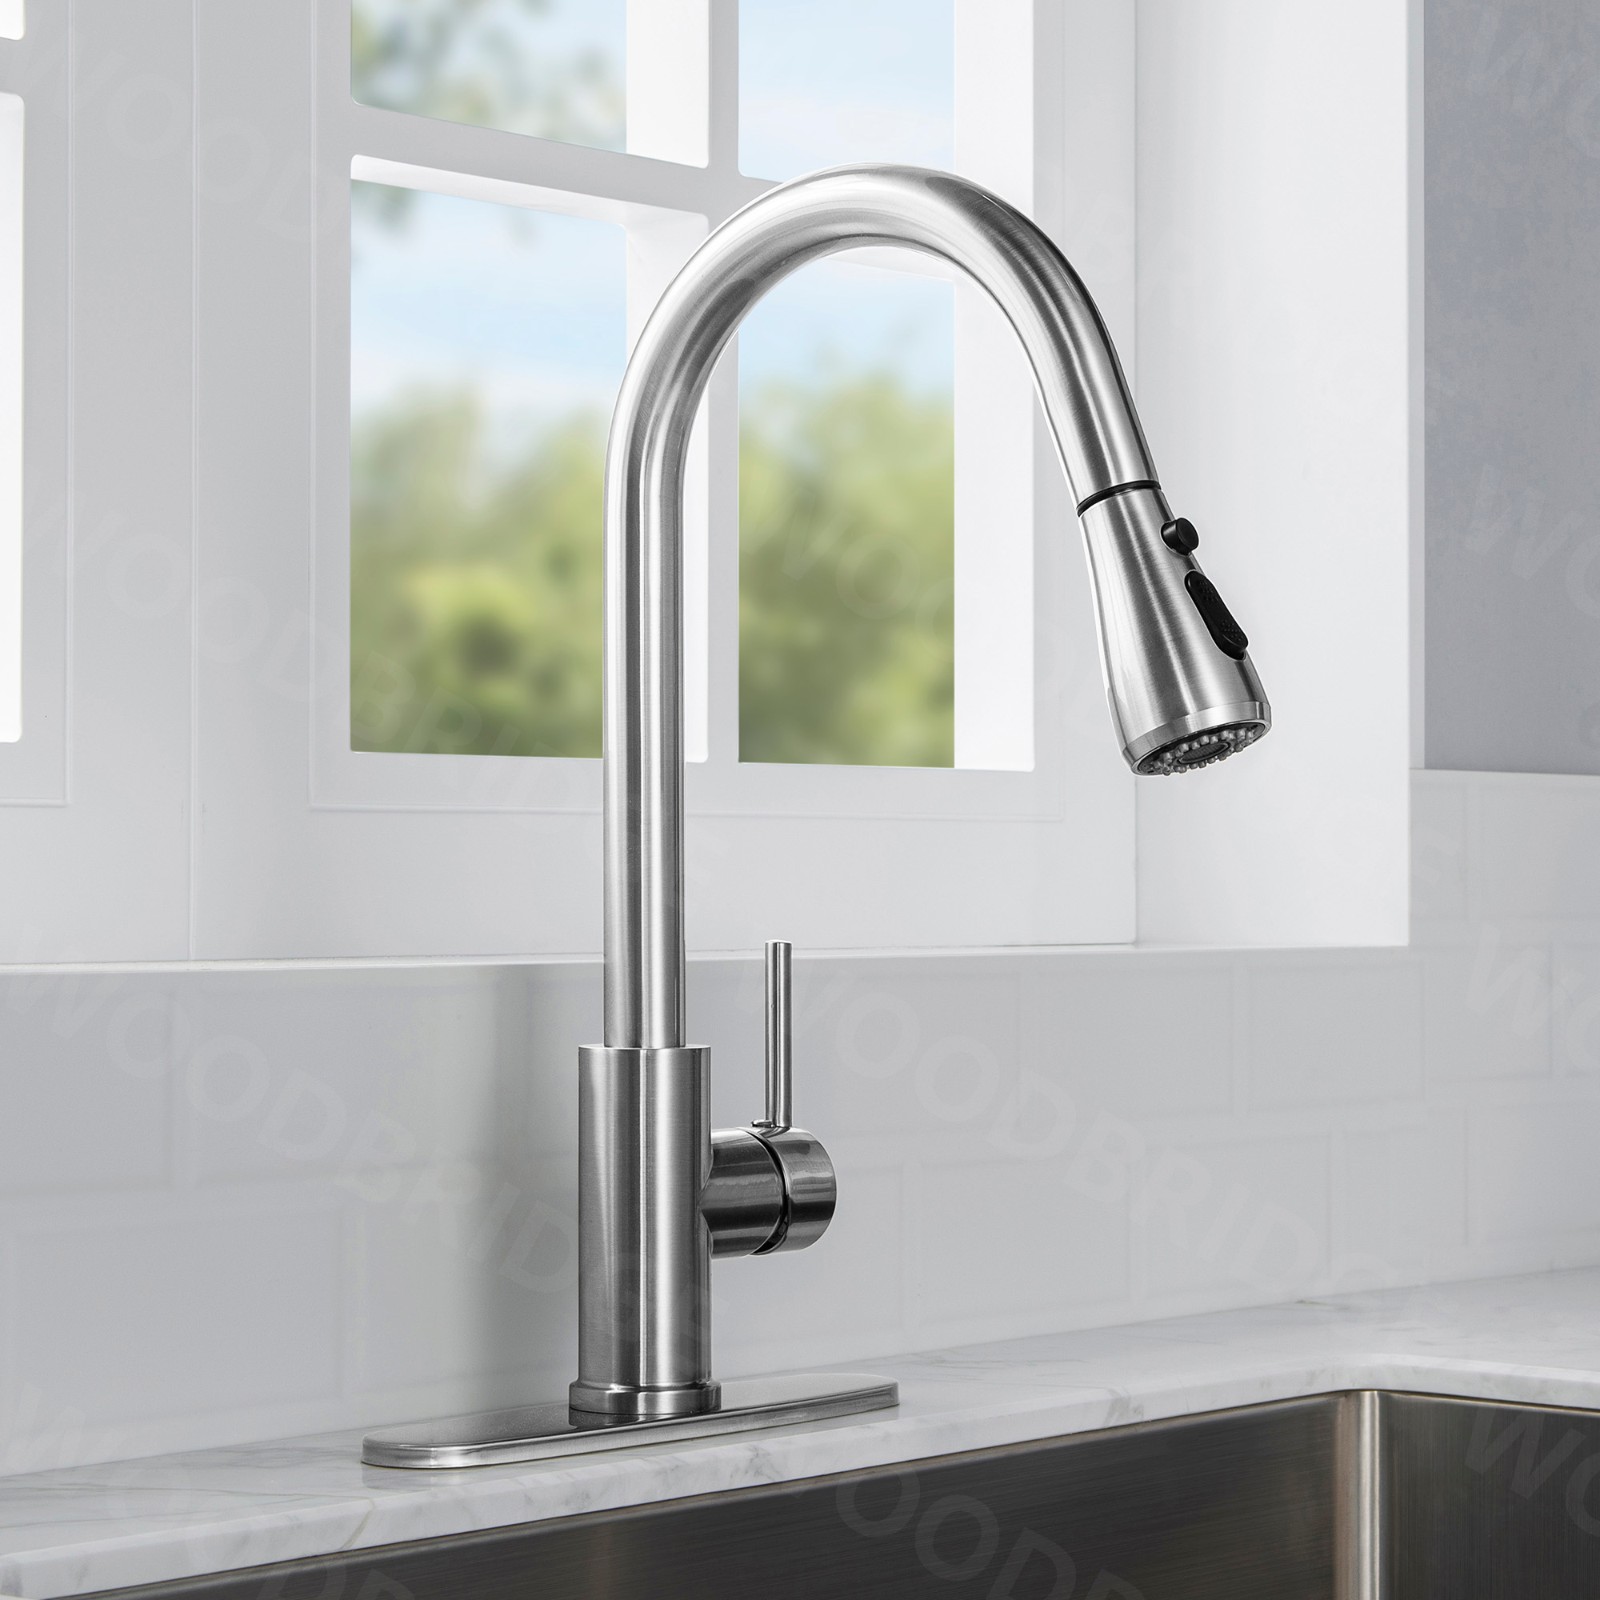  WOODBRIDGE WK090802CH Single Handle Pull Down Kitchen Faucet in Polished Chrome Finish._5021